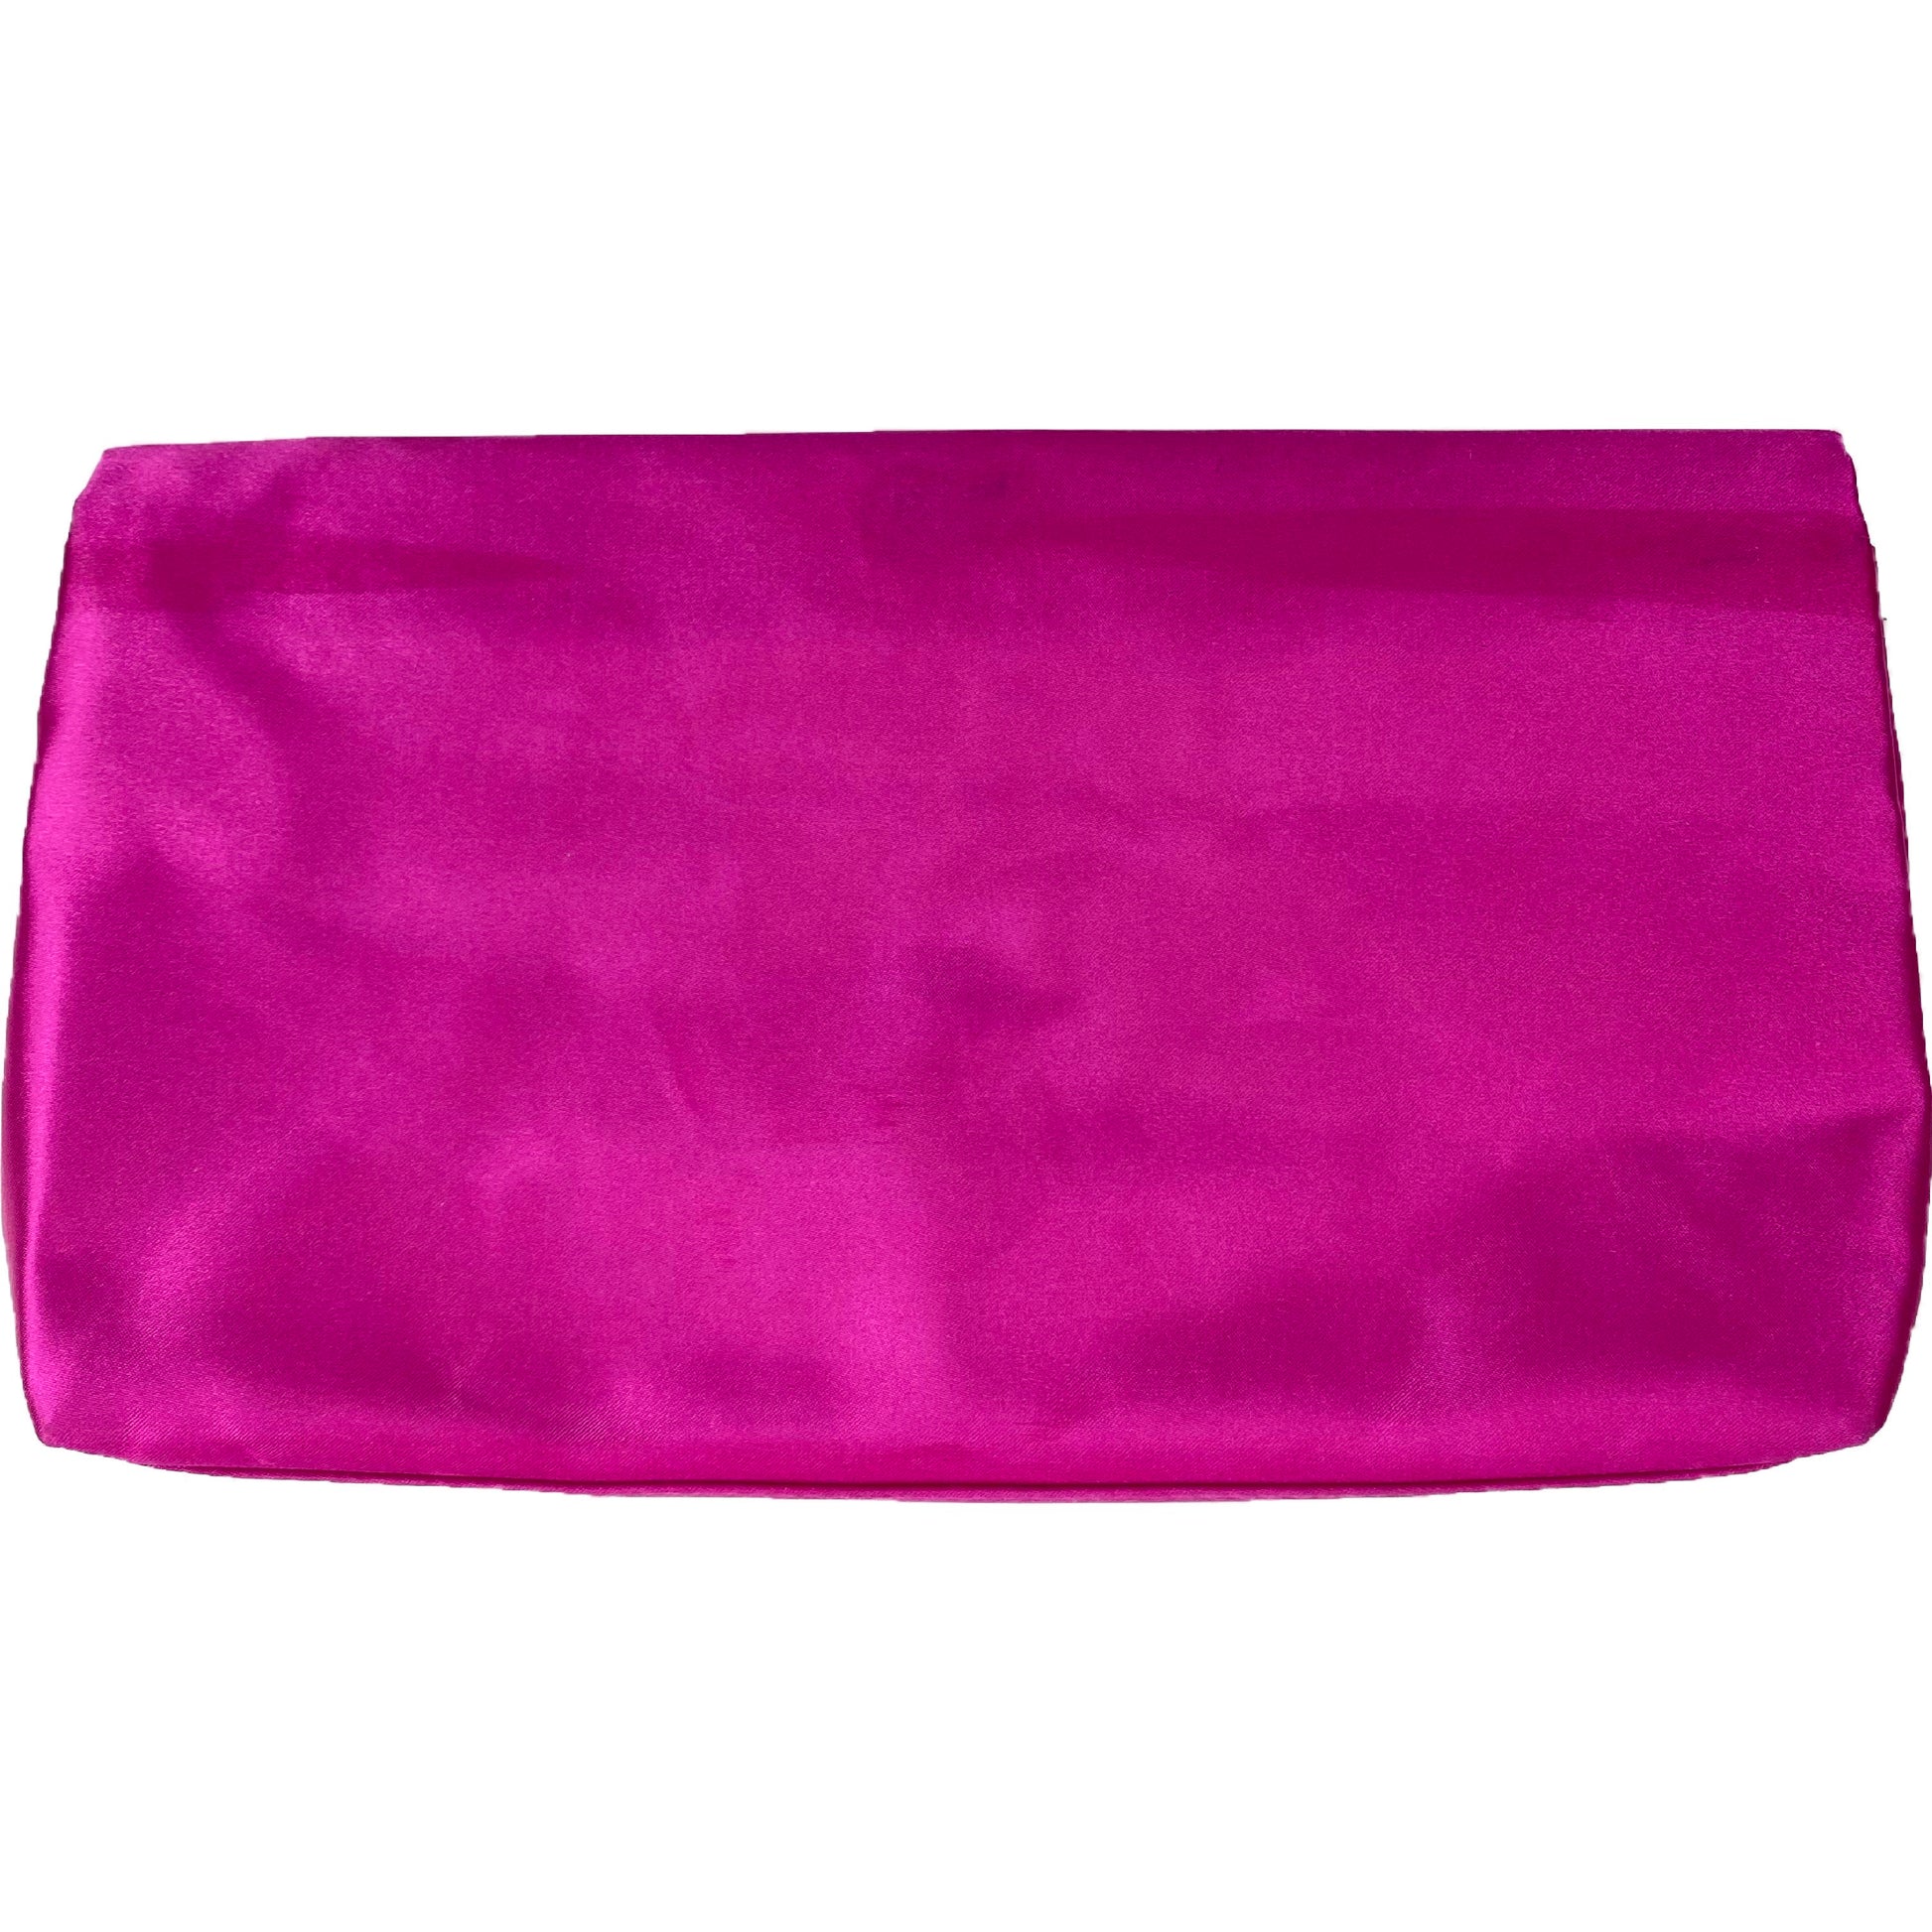 Juicy Couture Pink Satin Foldover Clutch